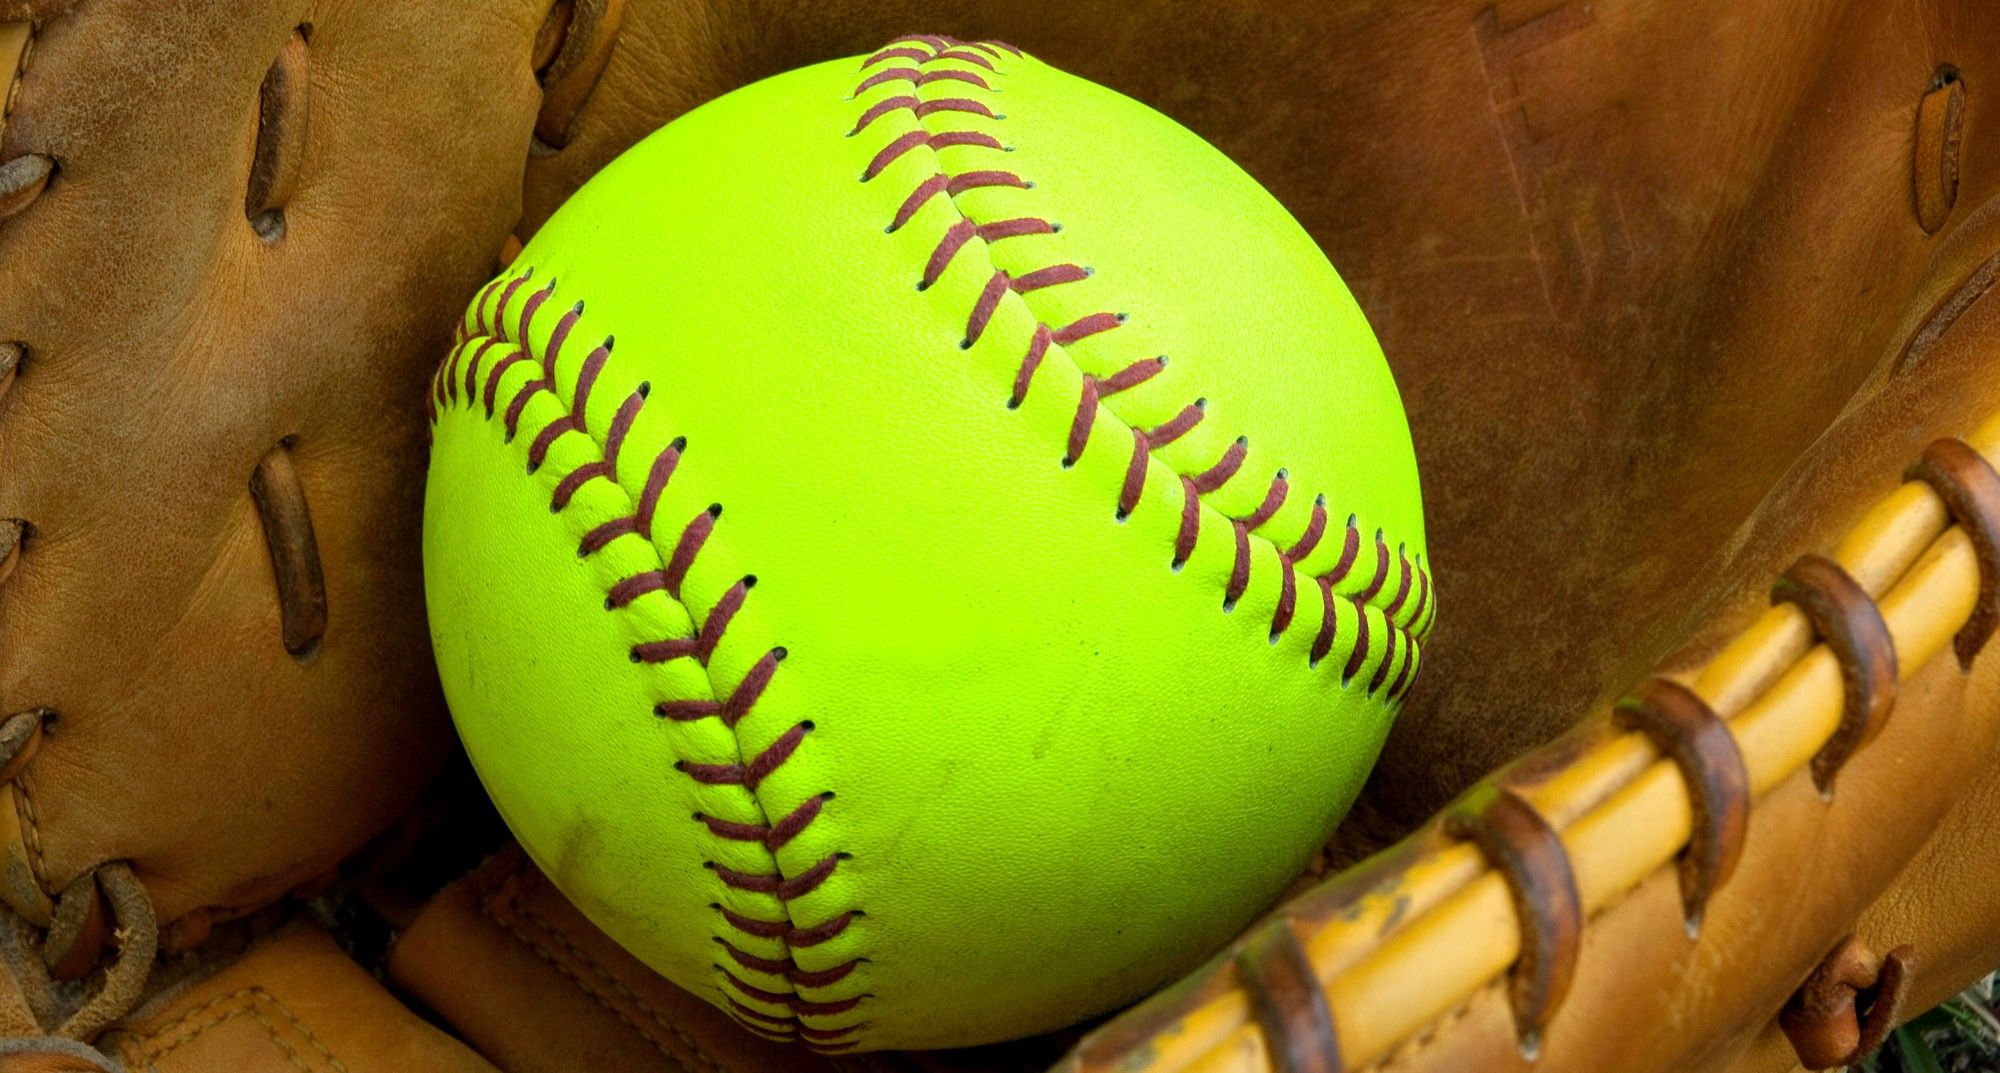 A softball is sitting in the glove - Softball